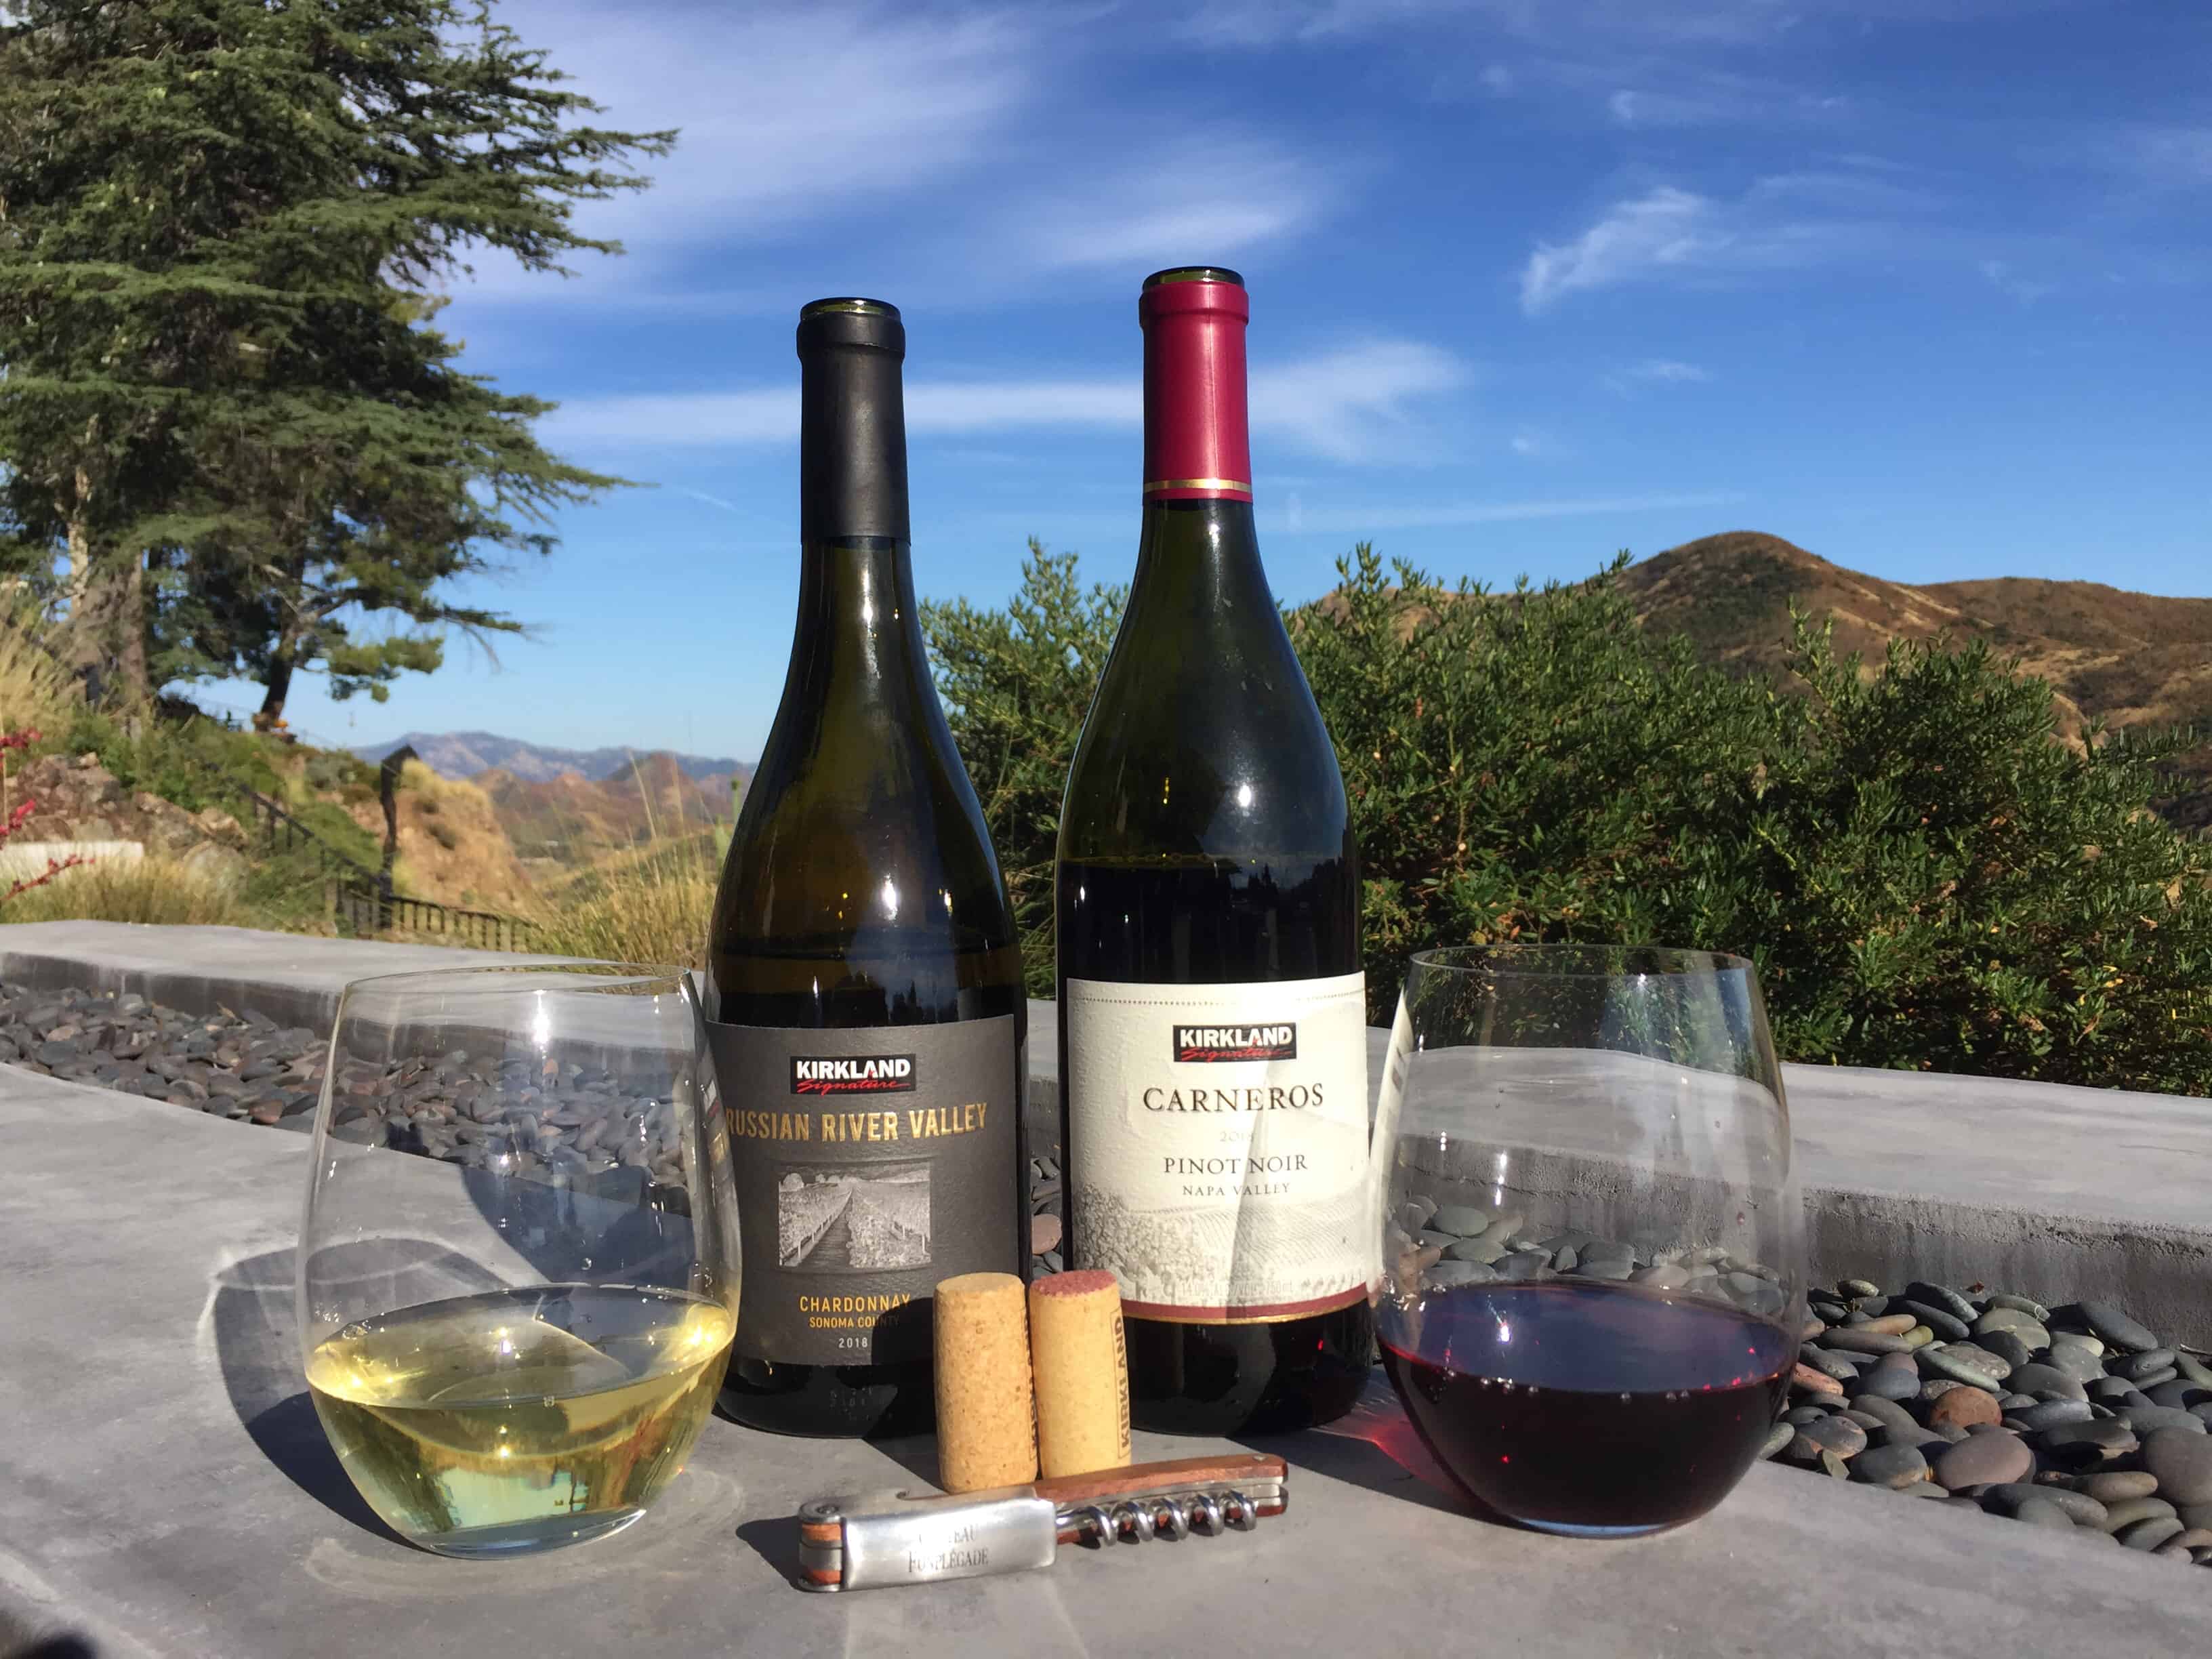 Bottles and glasses of Kirkland Signature Chardonnay and Pinot Noir